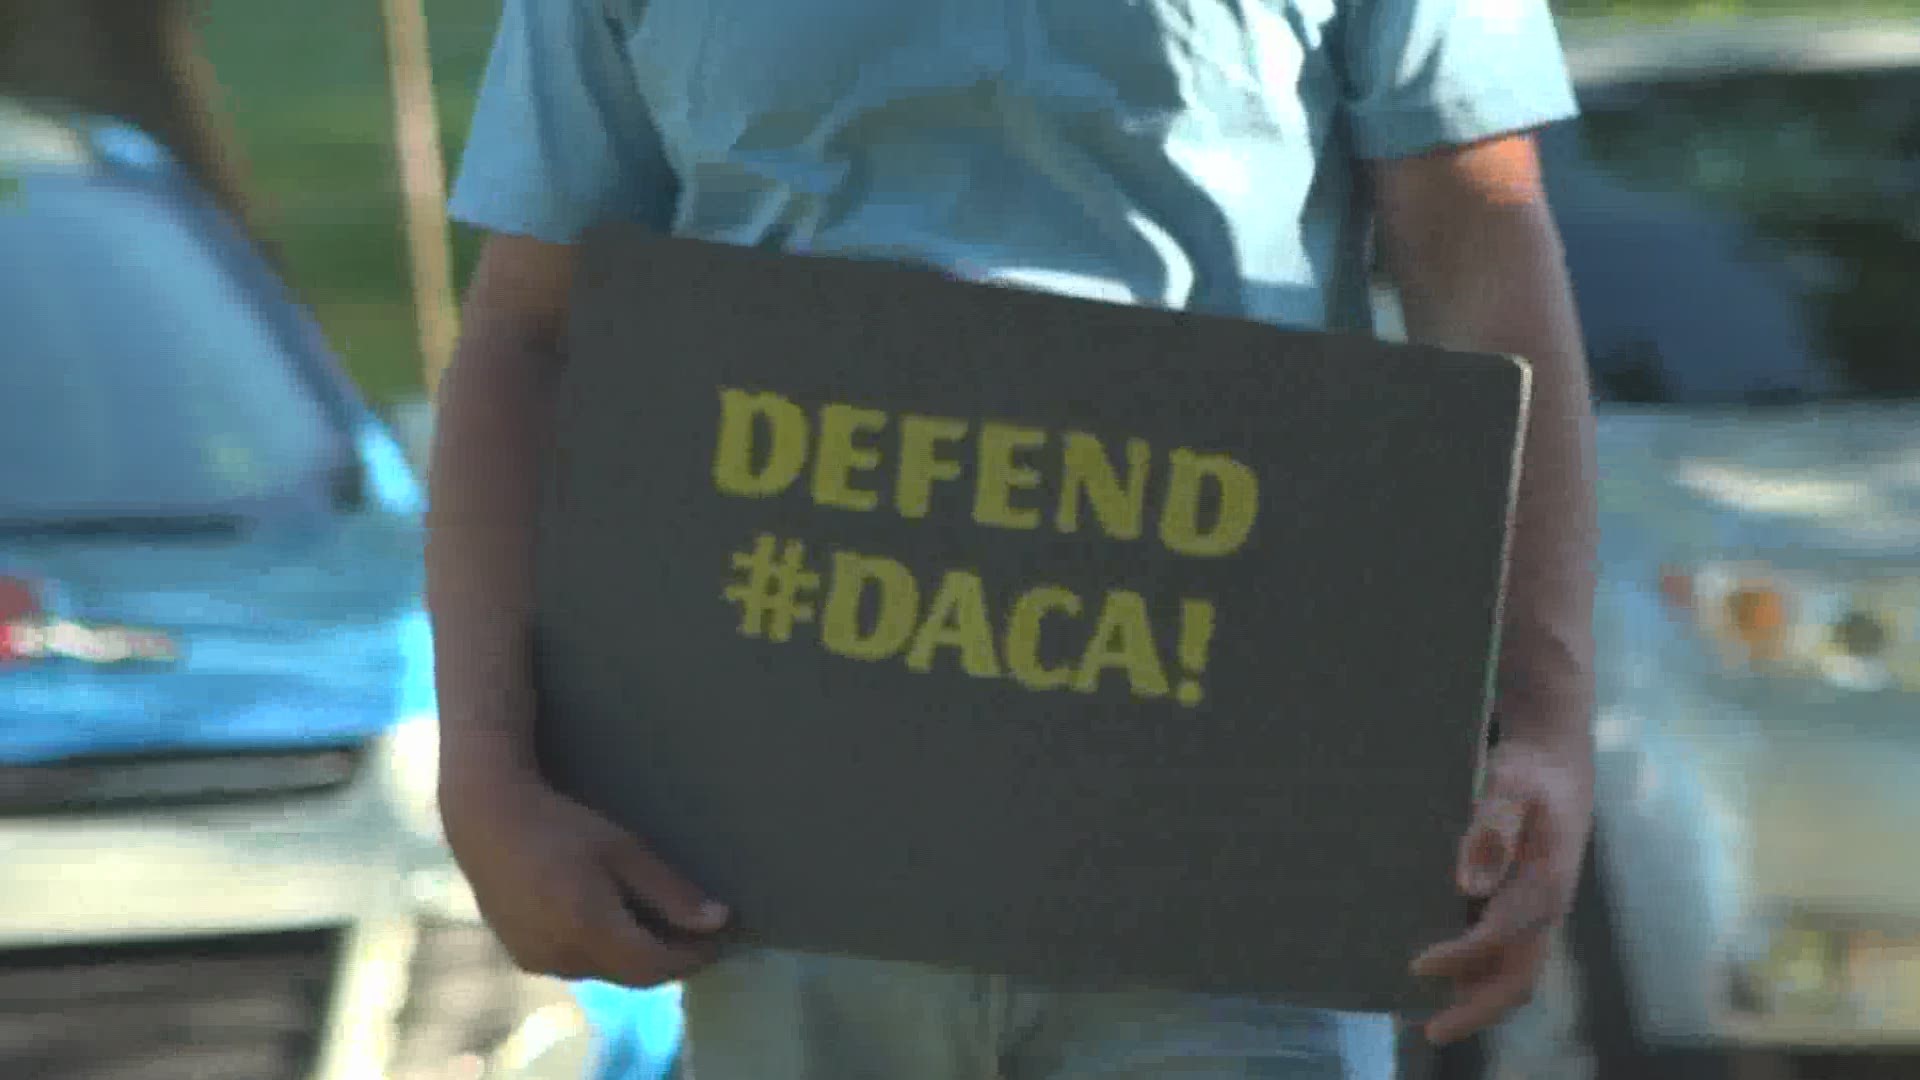 The event, called “DACA: Let us dream” took place from 6 to 9 p.m. at Garfield Park.